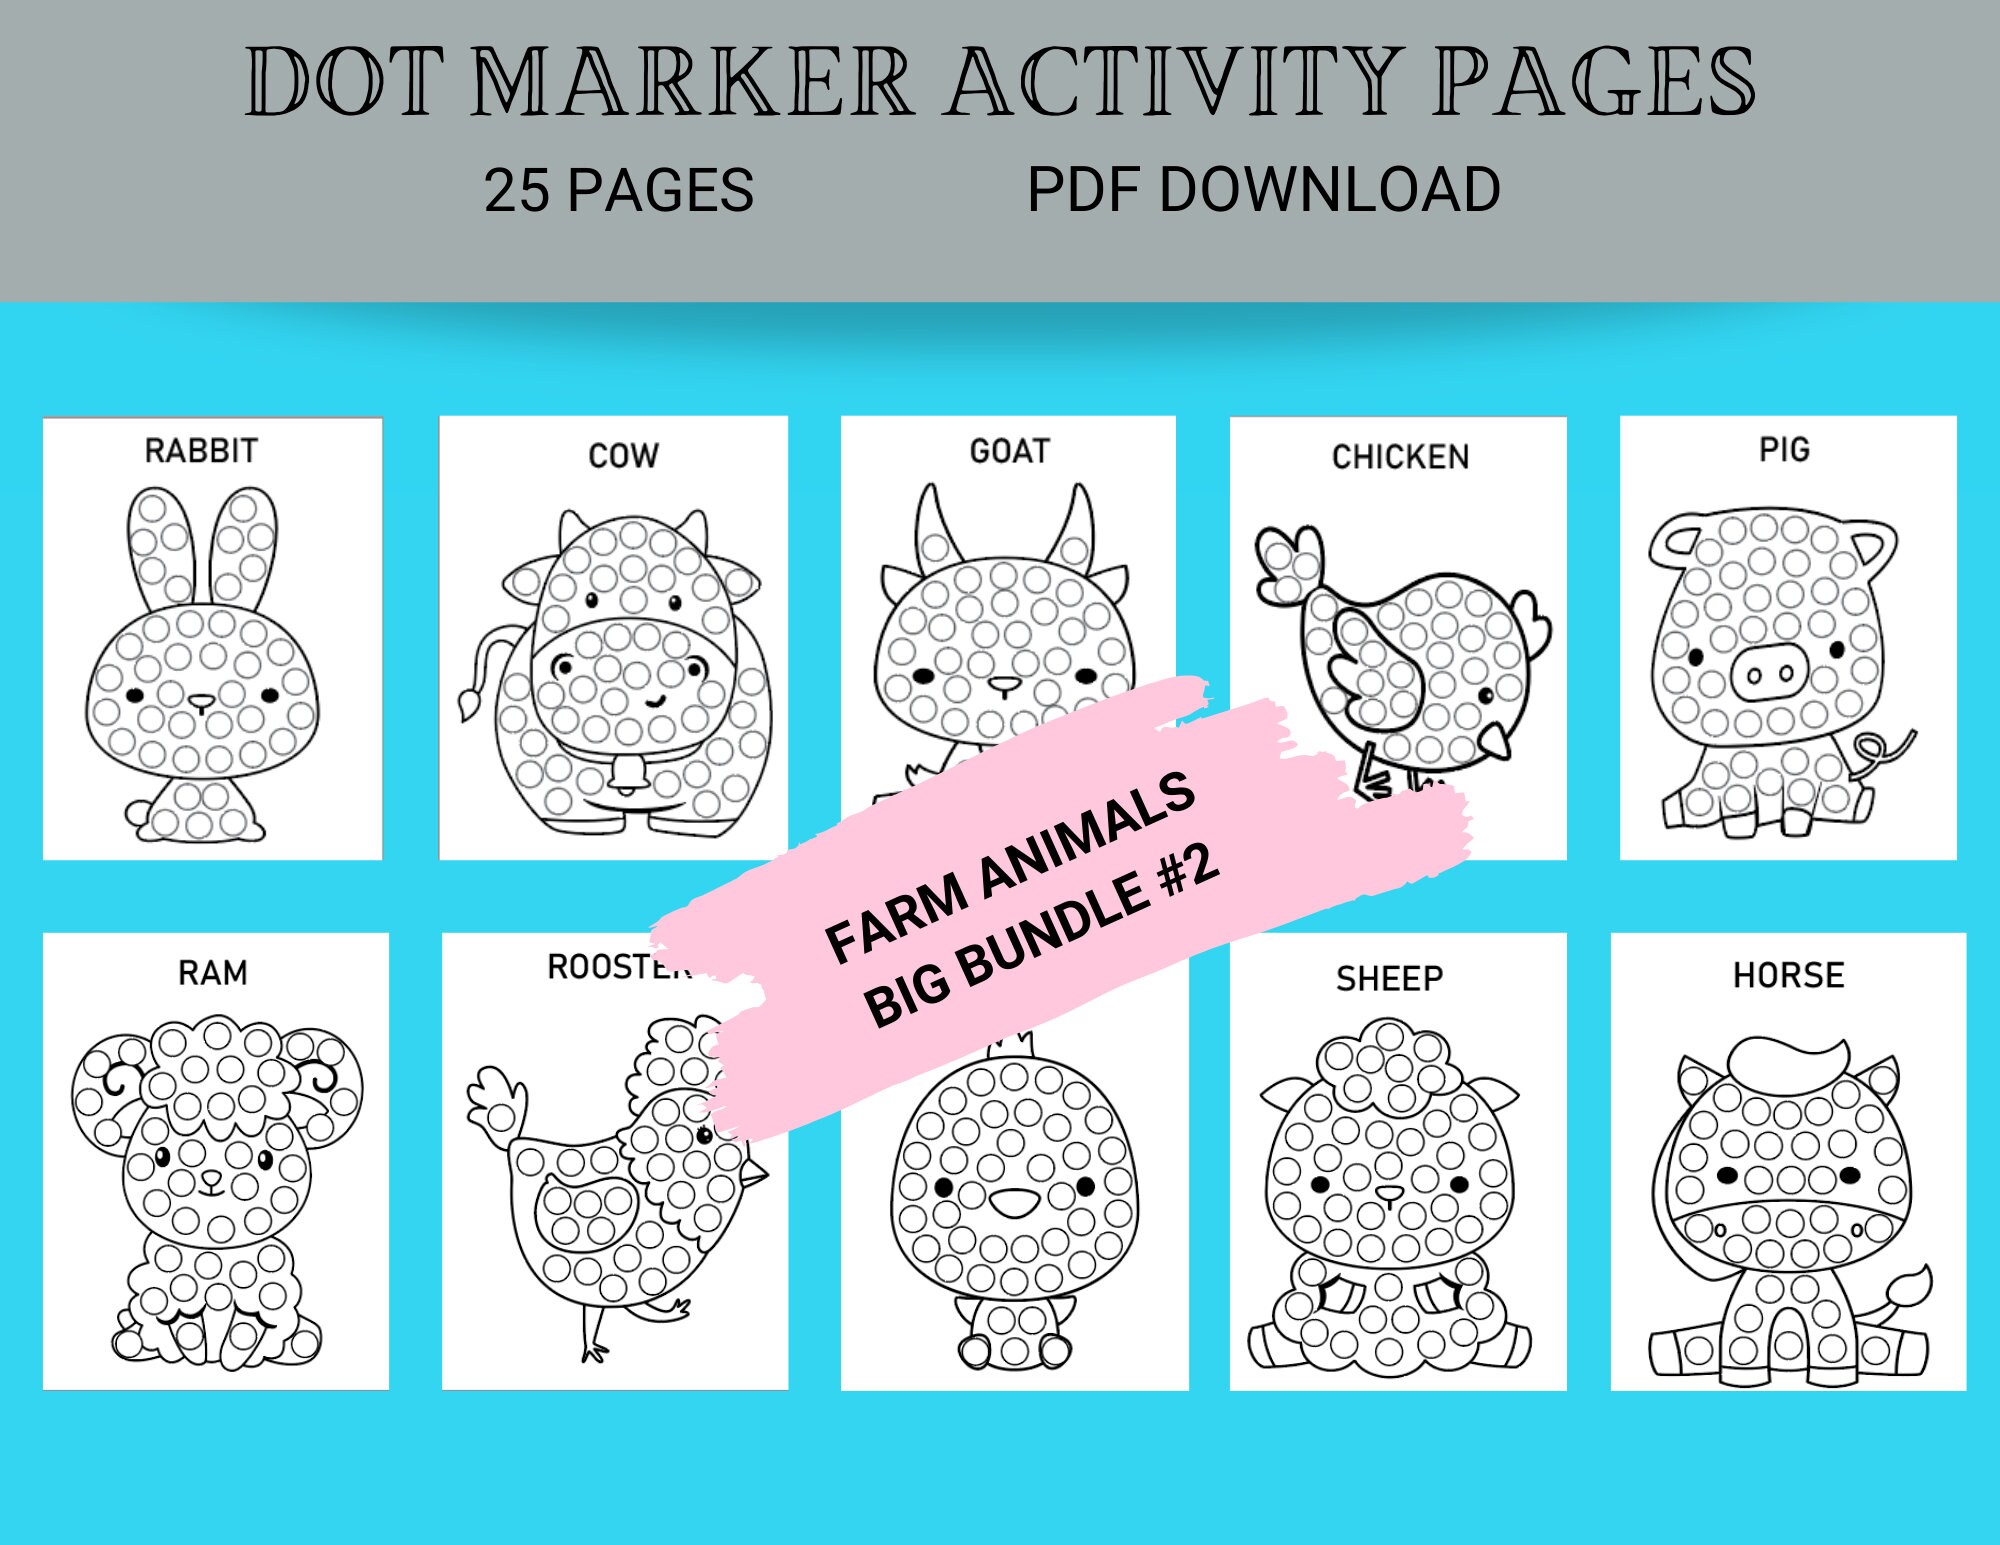 Arctic Animals Coloring & Dotter Pages Booklet, Polar Bear